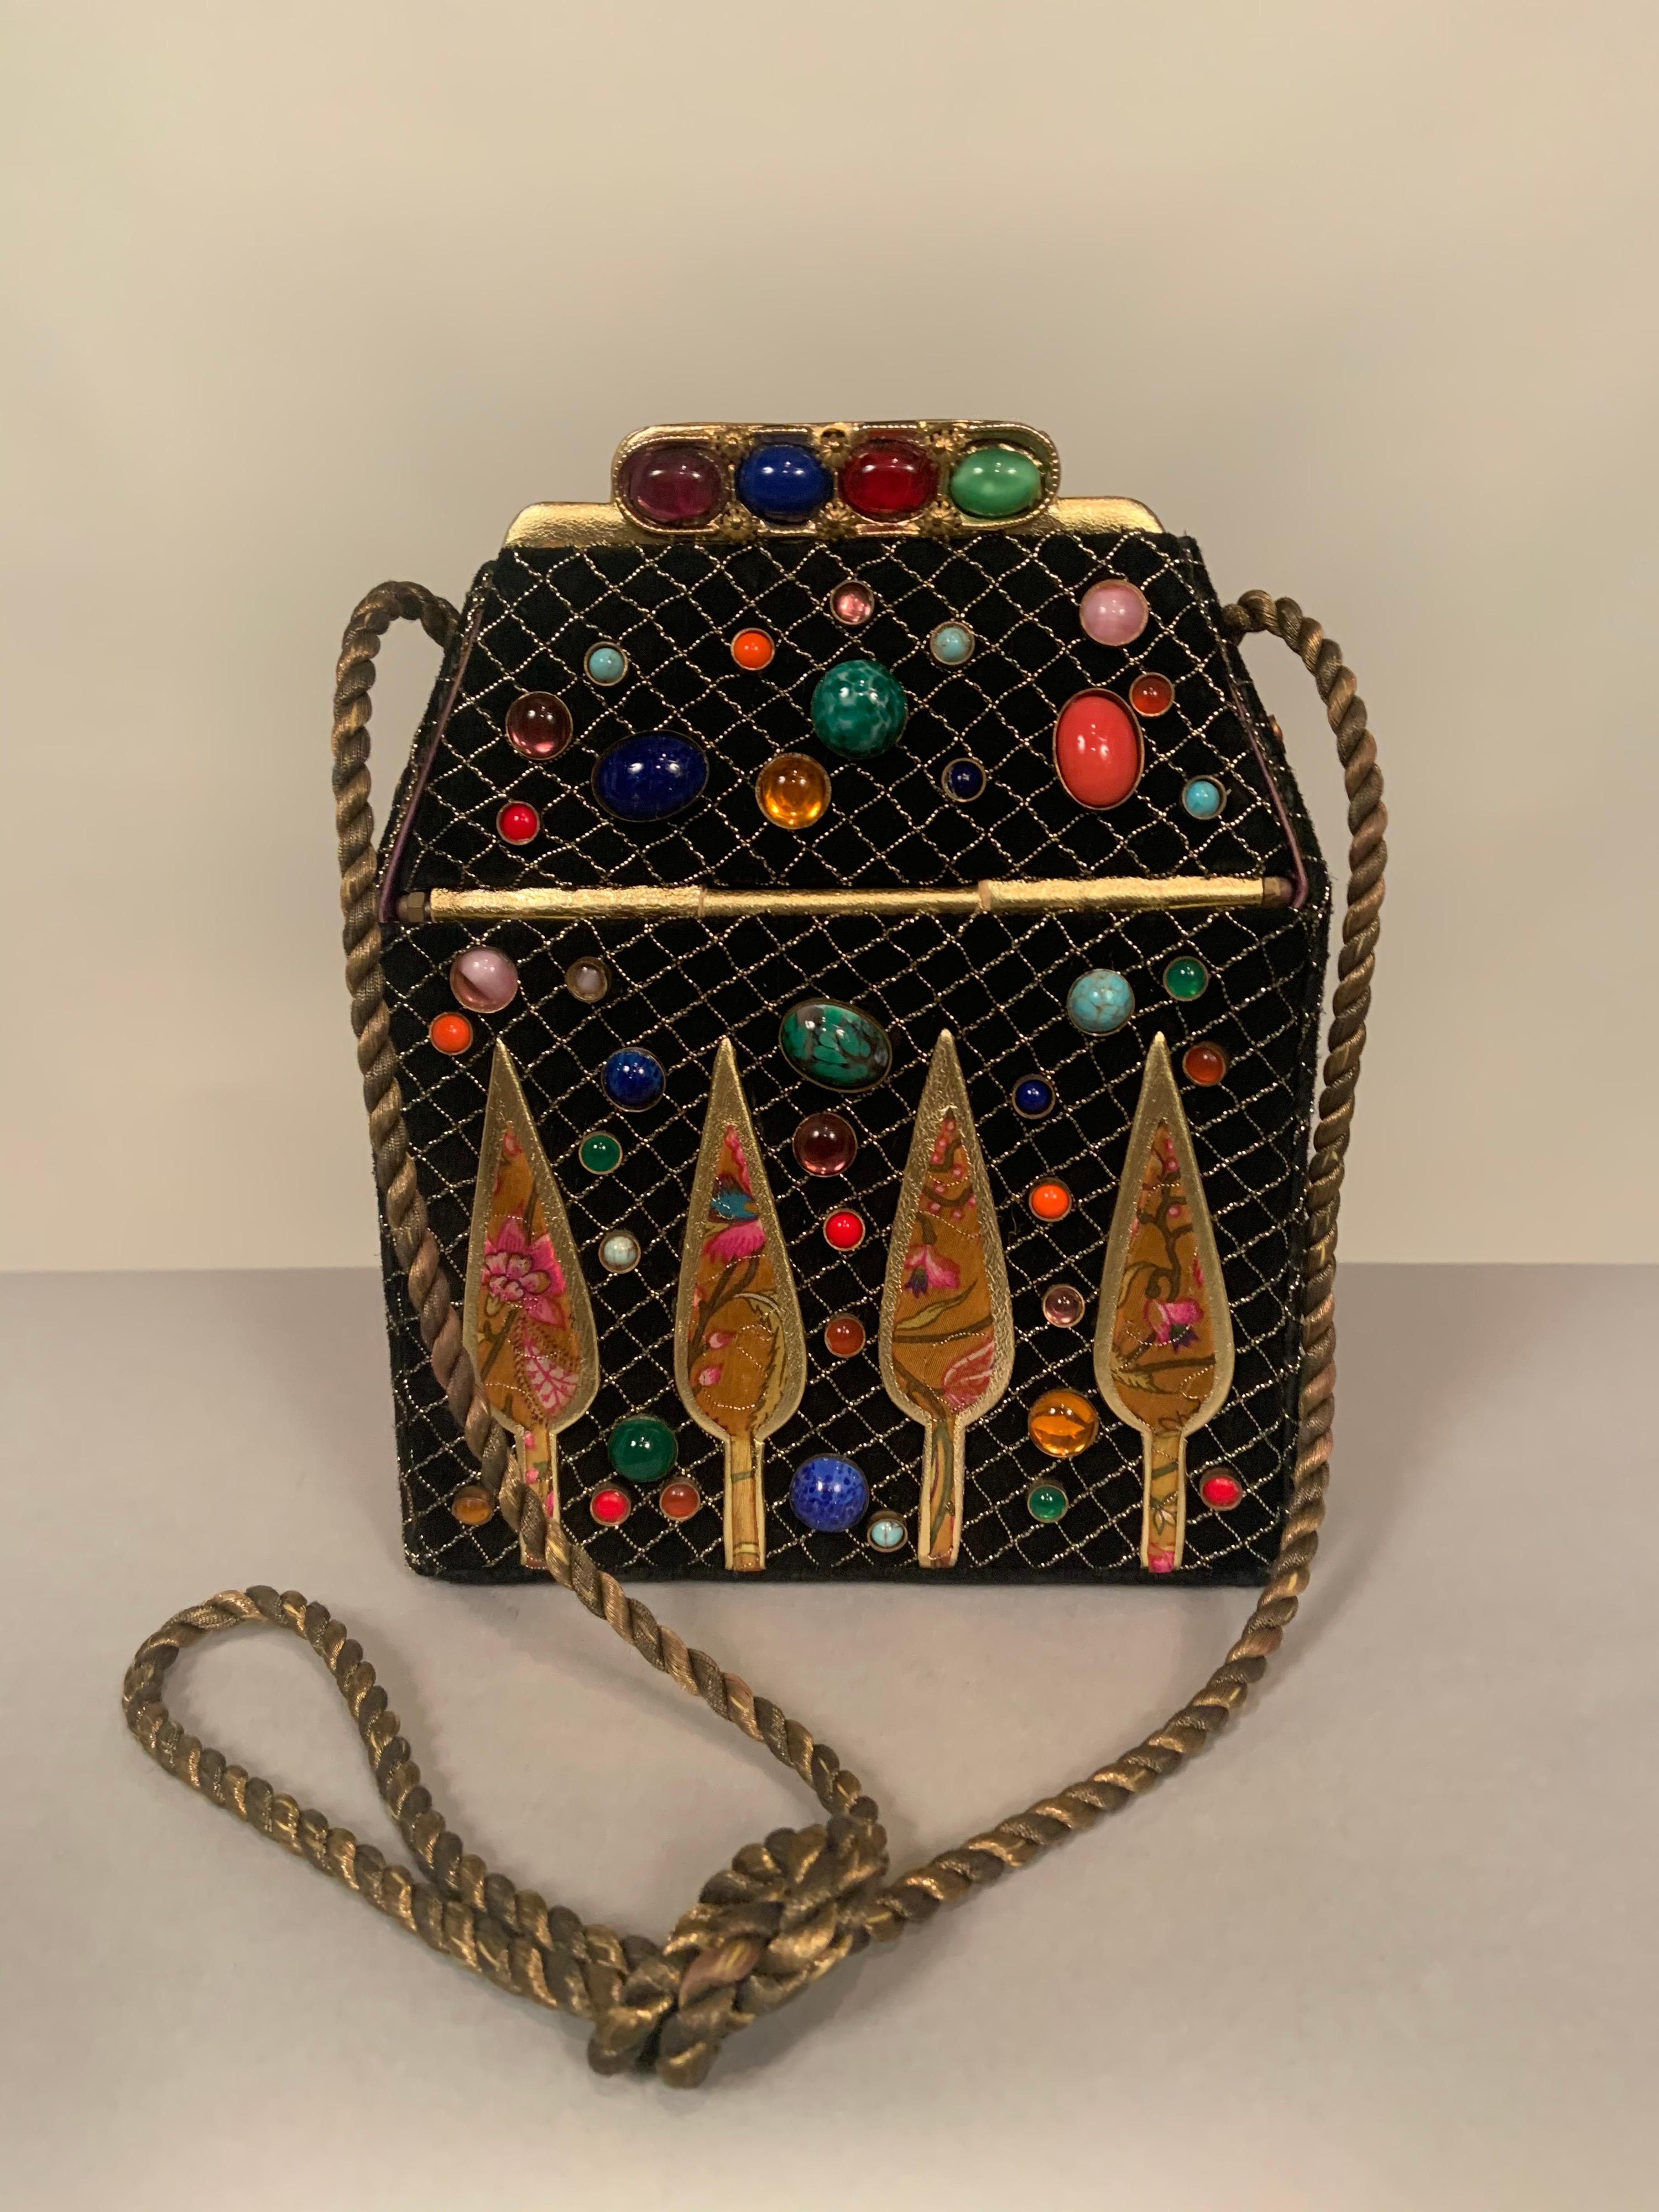 Helene Angeli located in Nice, in the South of France, designs fanciful handbags in the shape of familiar objects. This black suede bag is inspired by a beautiful house. The suede is covered with a lattice of metallic gold thread in a nod to